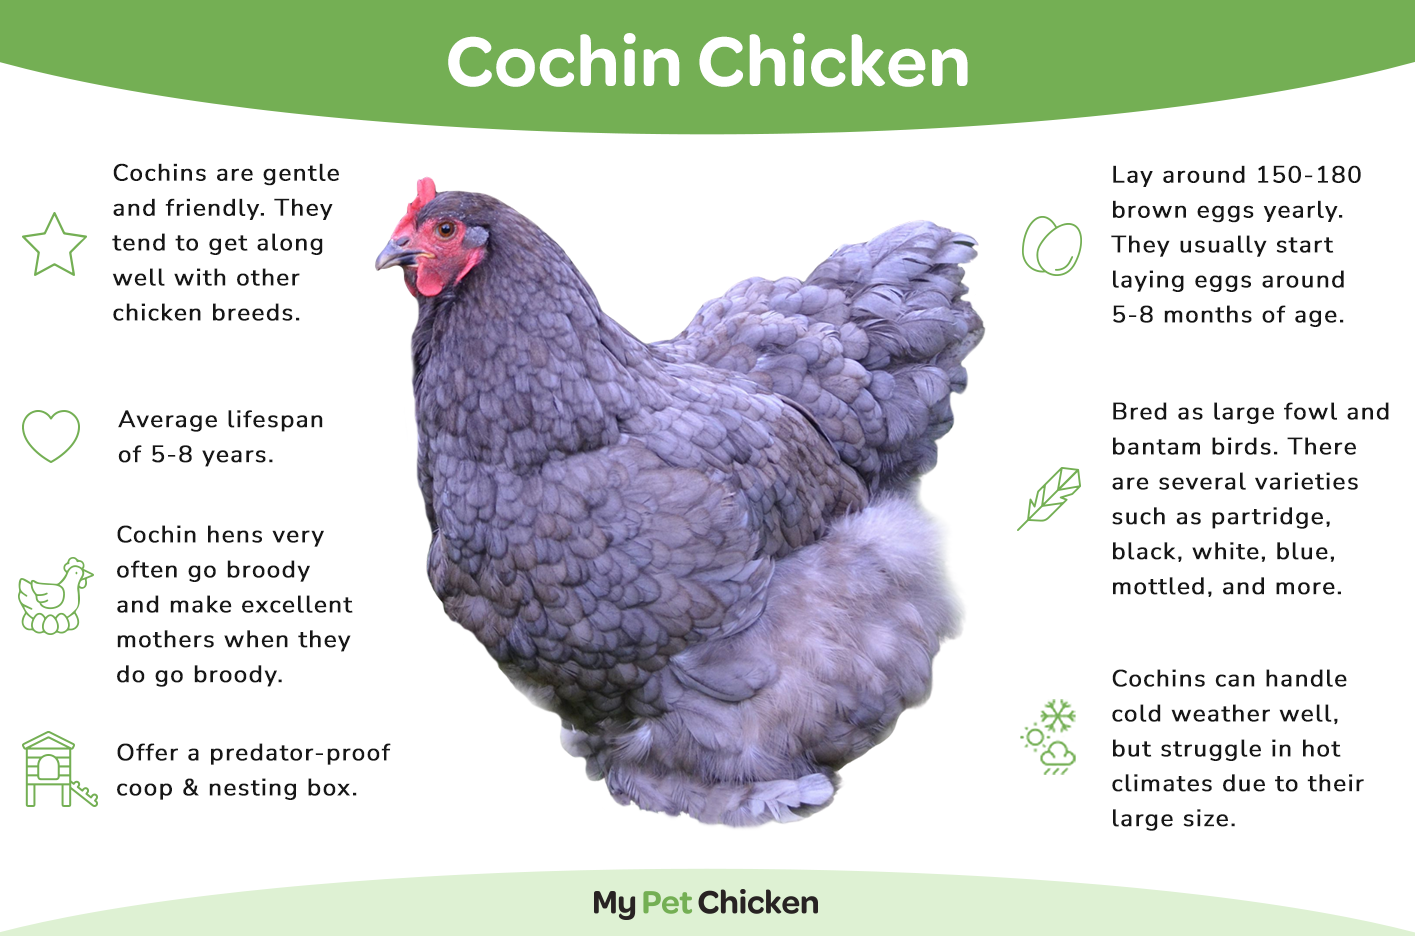 Cochin hens usually start laying around 5-8 months of age. 